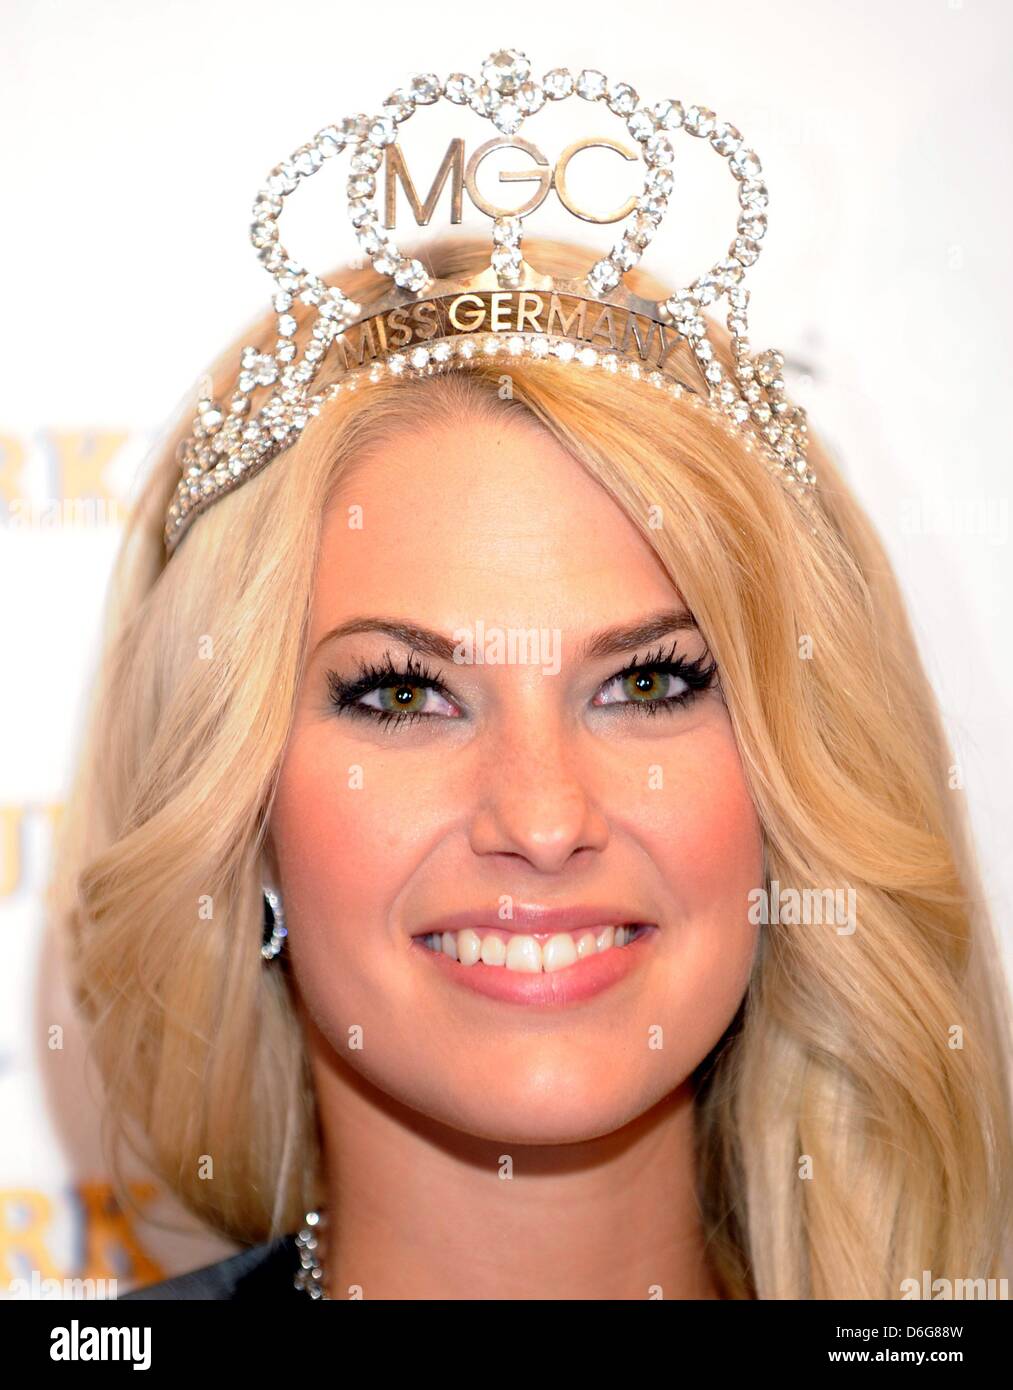 Isabel Guelck from Horst poses after her win in the 2012 'Miss Germany' contest at the Europapark in Rust, Germany, 11 February 2012. She competed against 22 women in the final round. 6,530 women applied for the competition. Photo: Patrick Seeger Stock Photo